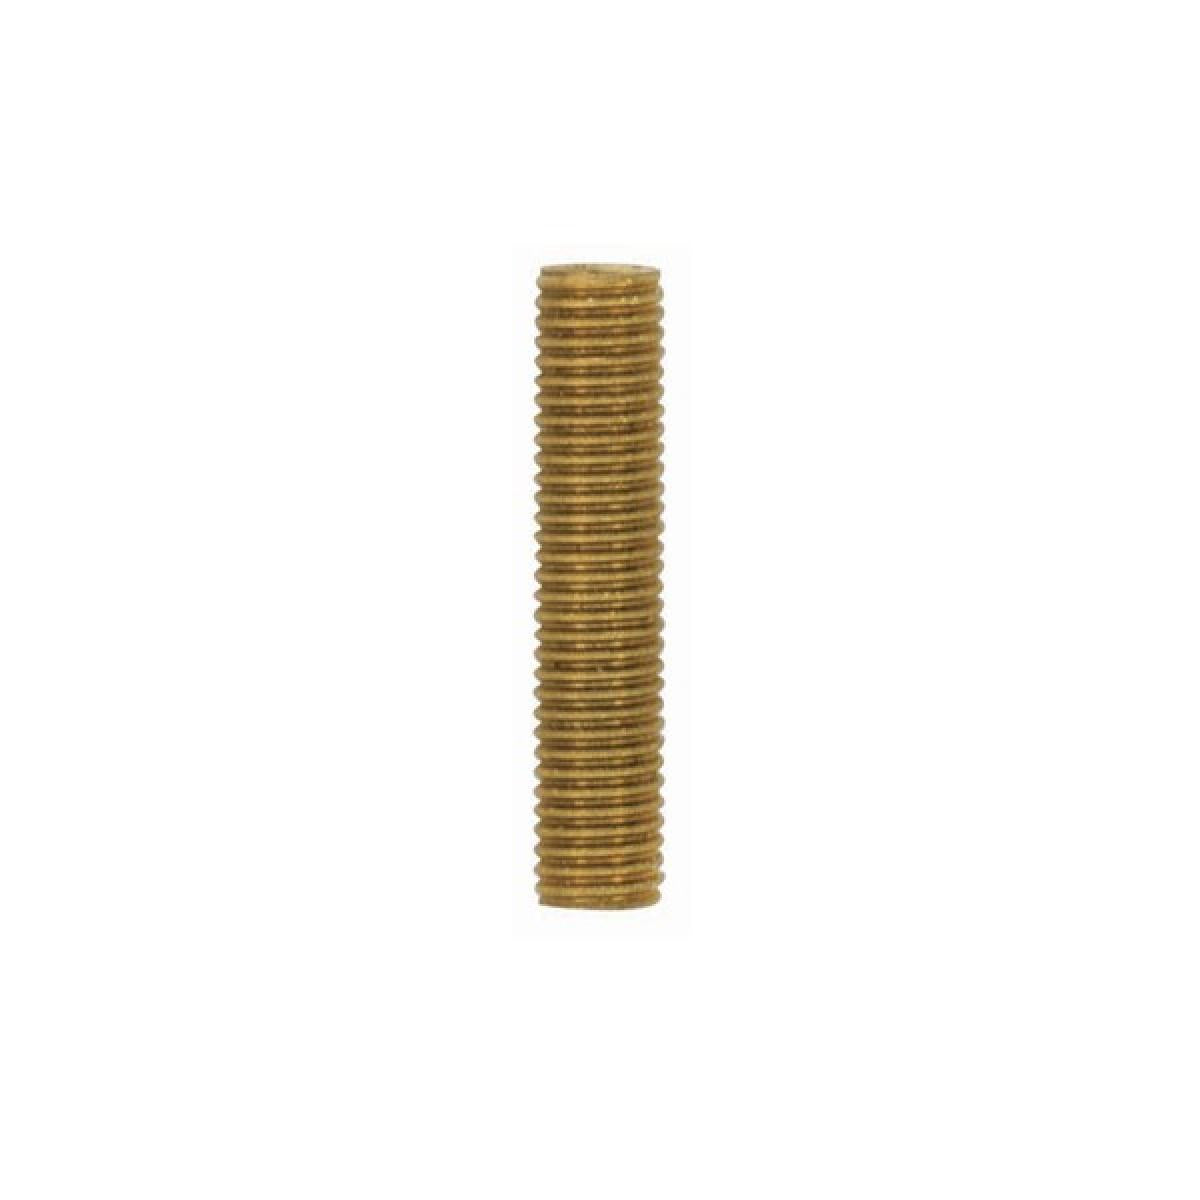 Satco 90-1187 1/8 IP Solid Brass Unfinished 1-1/4" Length 3/8" Wide